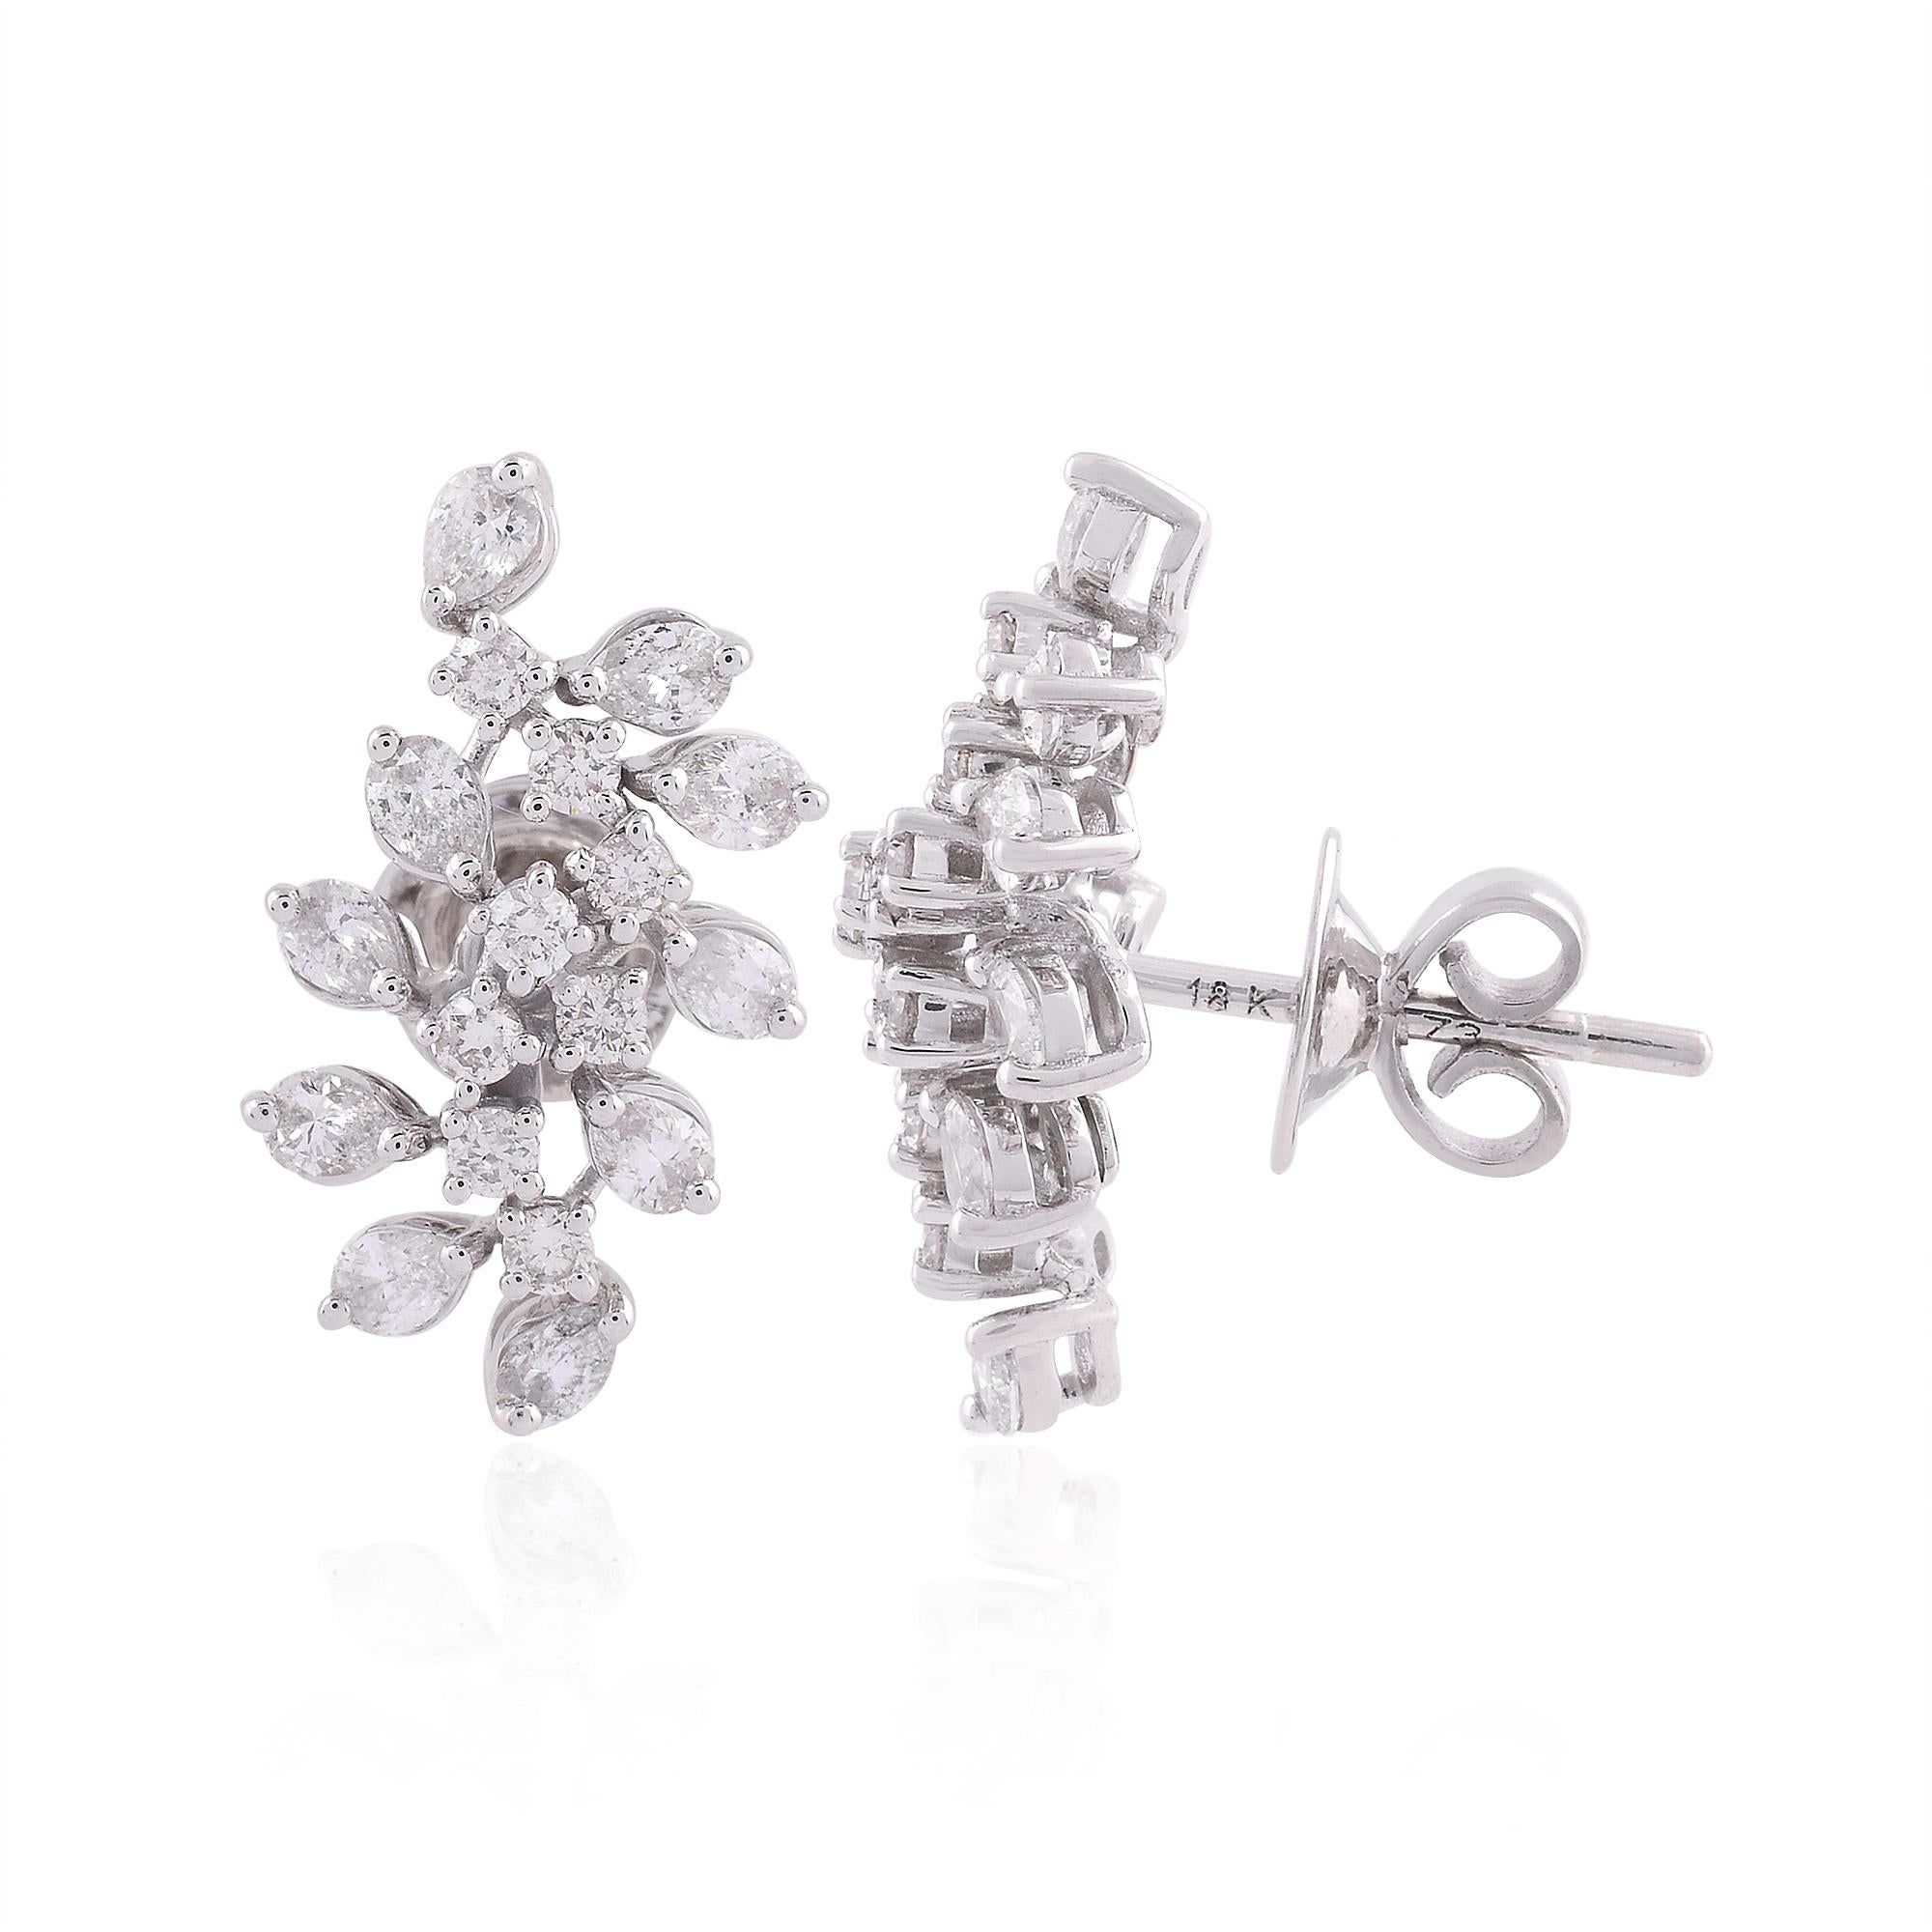 Item Code :- SEE-1543
Gross Weight :- 5.30 gm
18k White Gold Weight :- 4.95 gm
Diamond Weight :- 1.77 Carat  ( AVERAGE DIAMOND CLARITY SI1-SI2 & COLOR H-I )
Earrings Length :- 20 mm approx.
✦ Sizing
.....................
We can adjust most items to